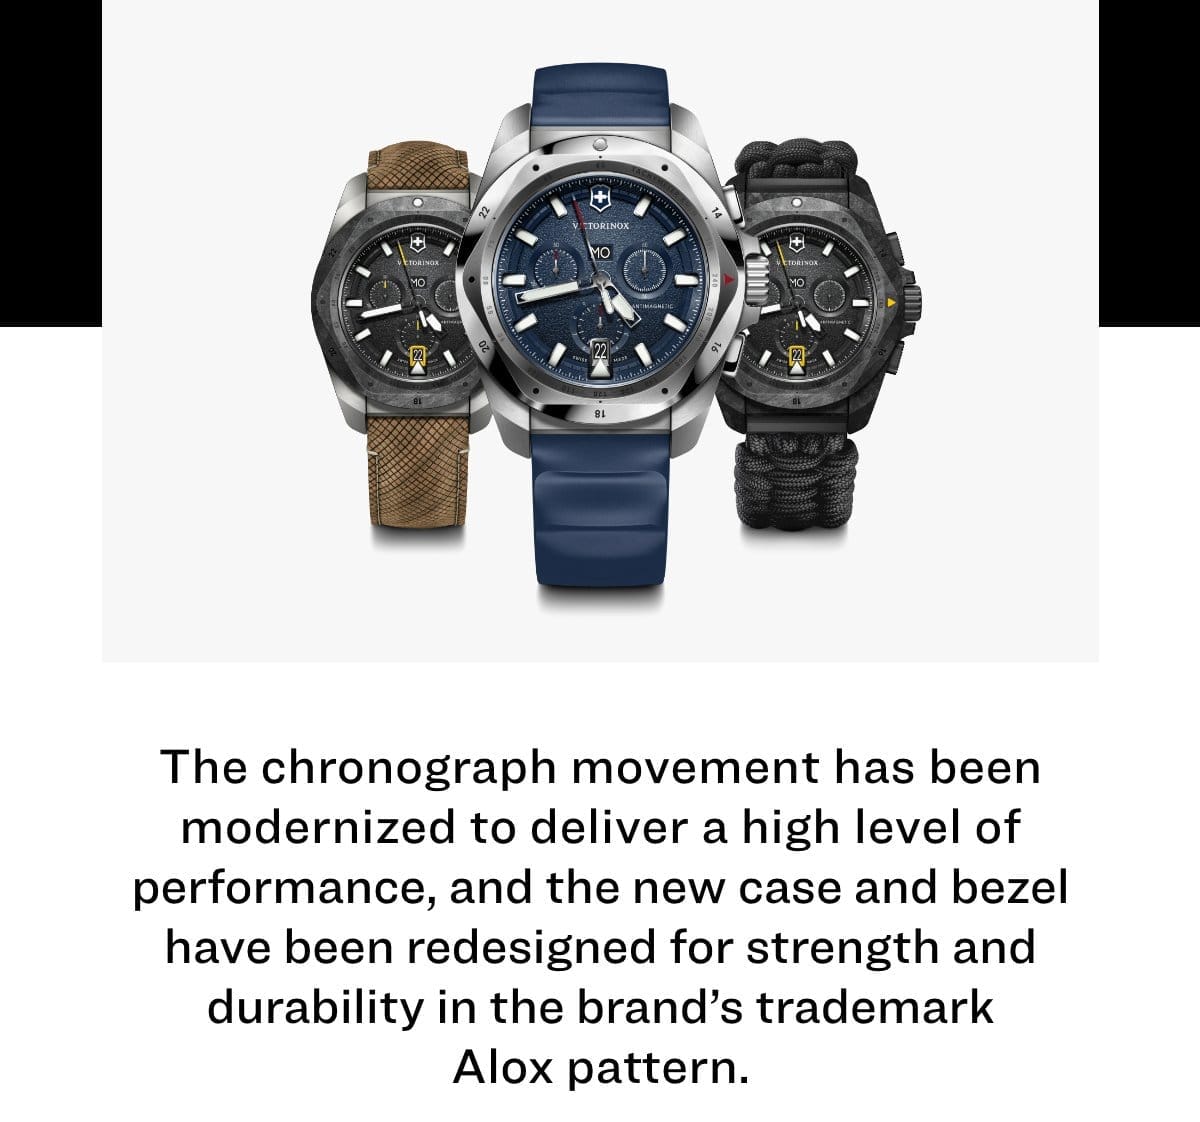  The chronograph movement has been modernized to deliver a high level of performance, and the new case and bezel have been redesigned for strength and durability in the brand’s trademark Alox pattern.